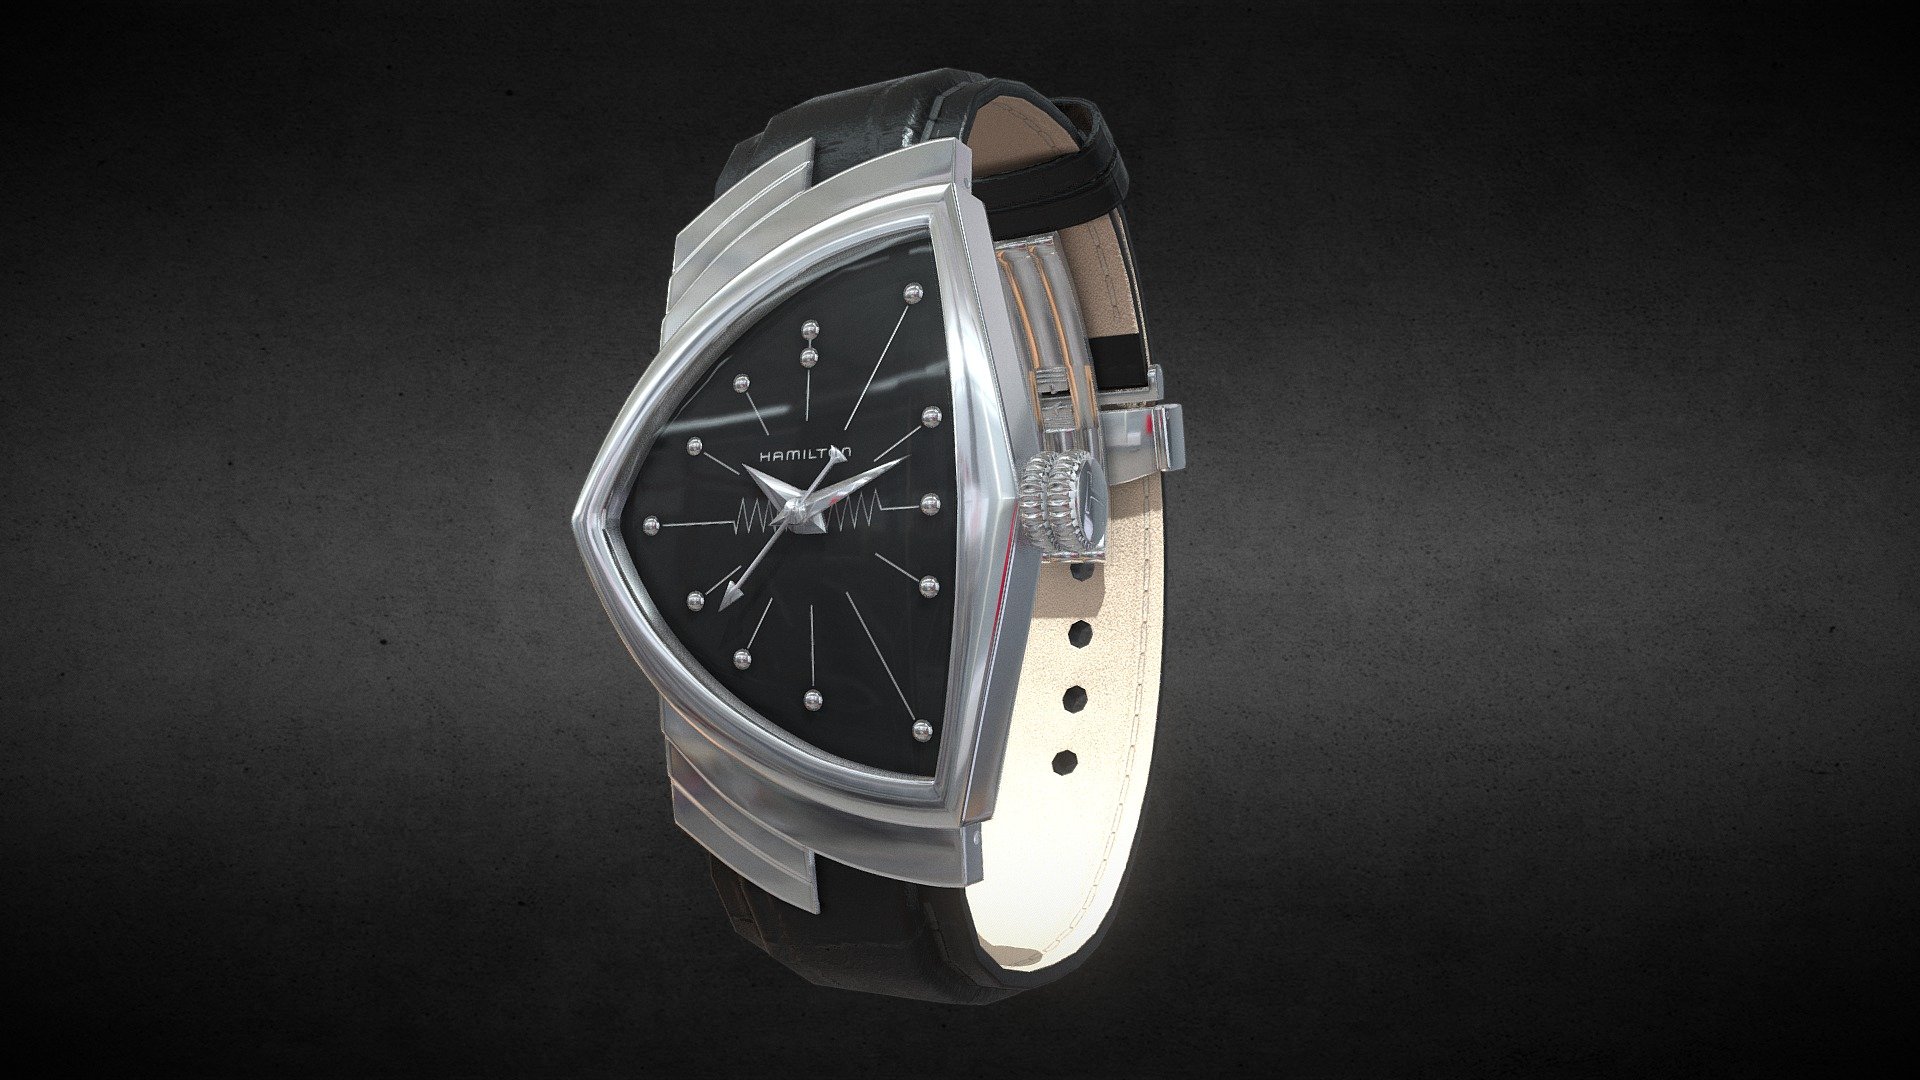 Awesome stainless steel Tudor Hamilton Ventura Quartz Watch
Use for Unreal Engine 4 and Unity3D. Try in augmented reality in the AR-Watches app. 
Links to the app: Android, iOS

Currently available for download in FBX format.

3D model developed by AR-Watches

Disclaimer: We do not own the design of the watch, we only made the 3D model 3d model